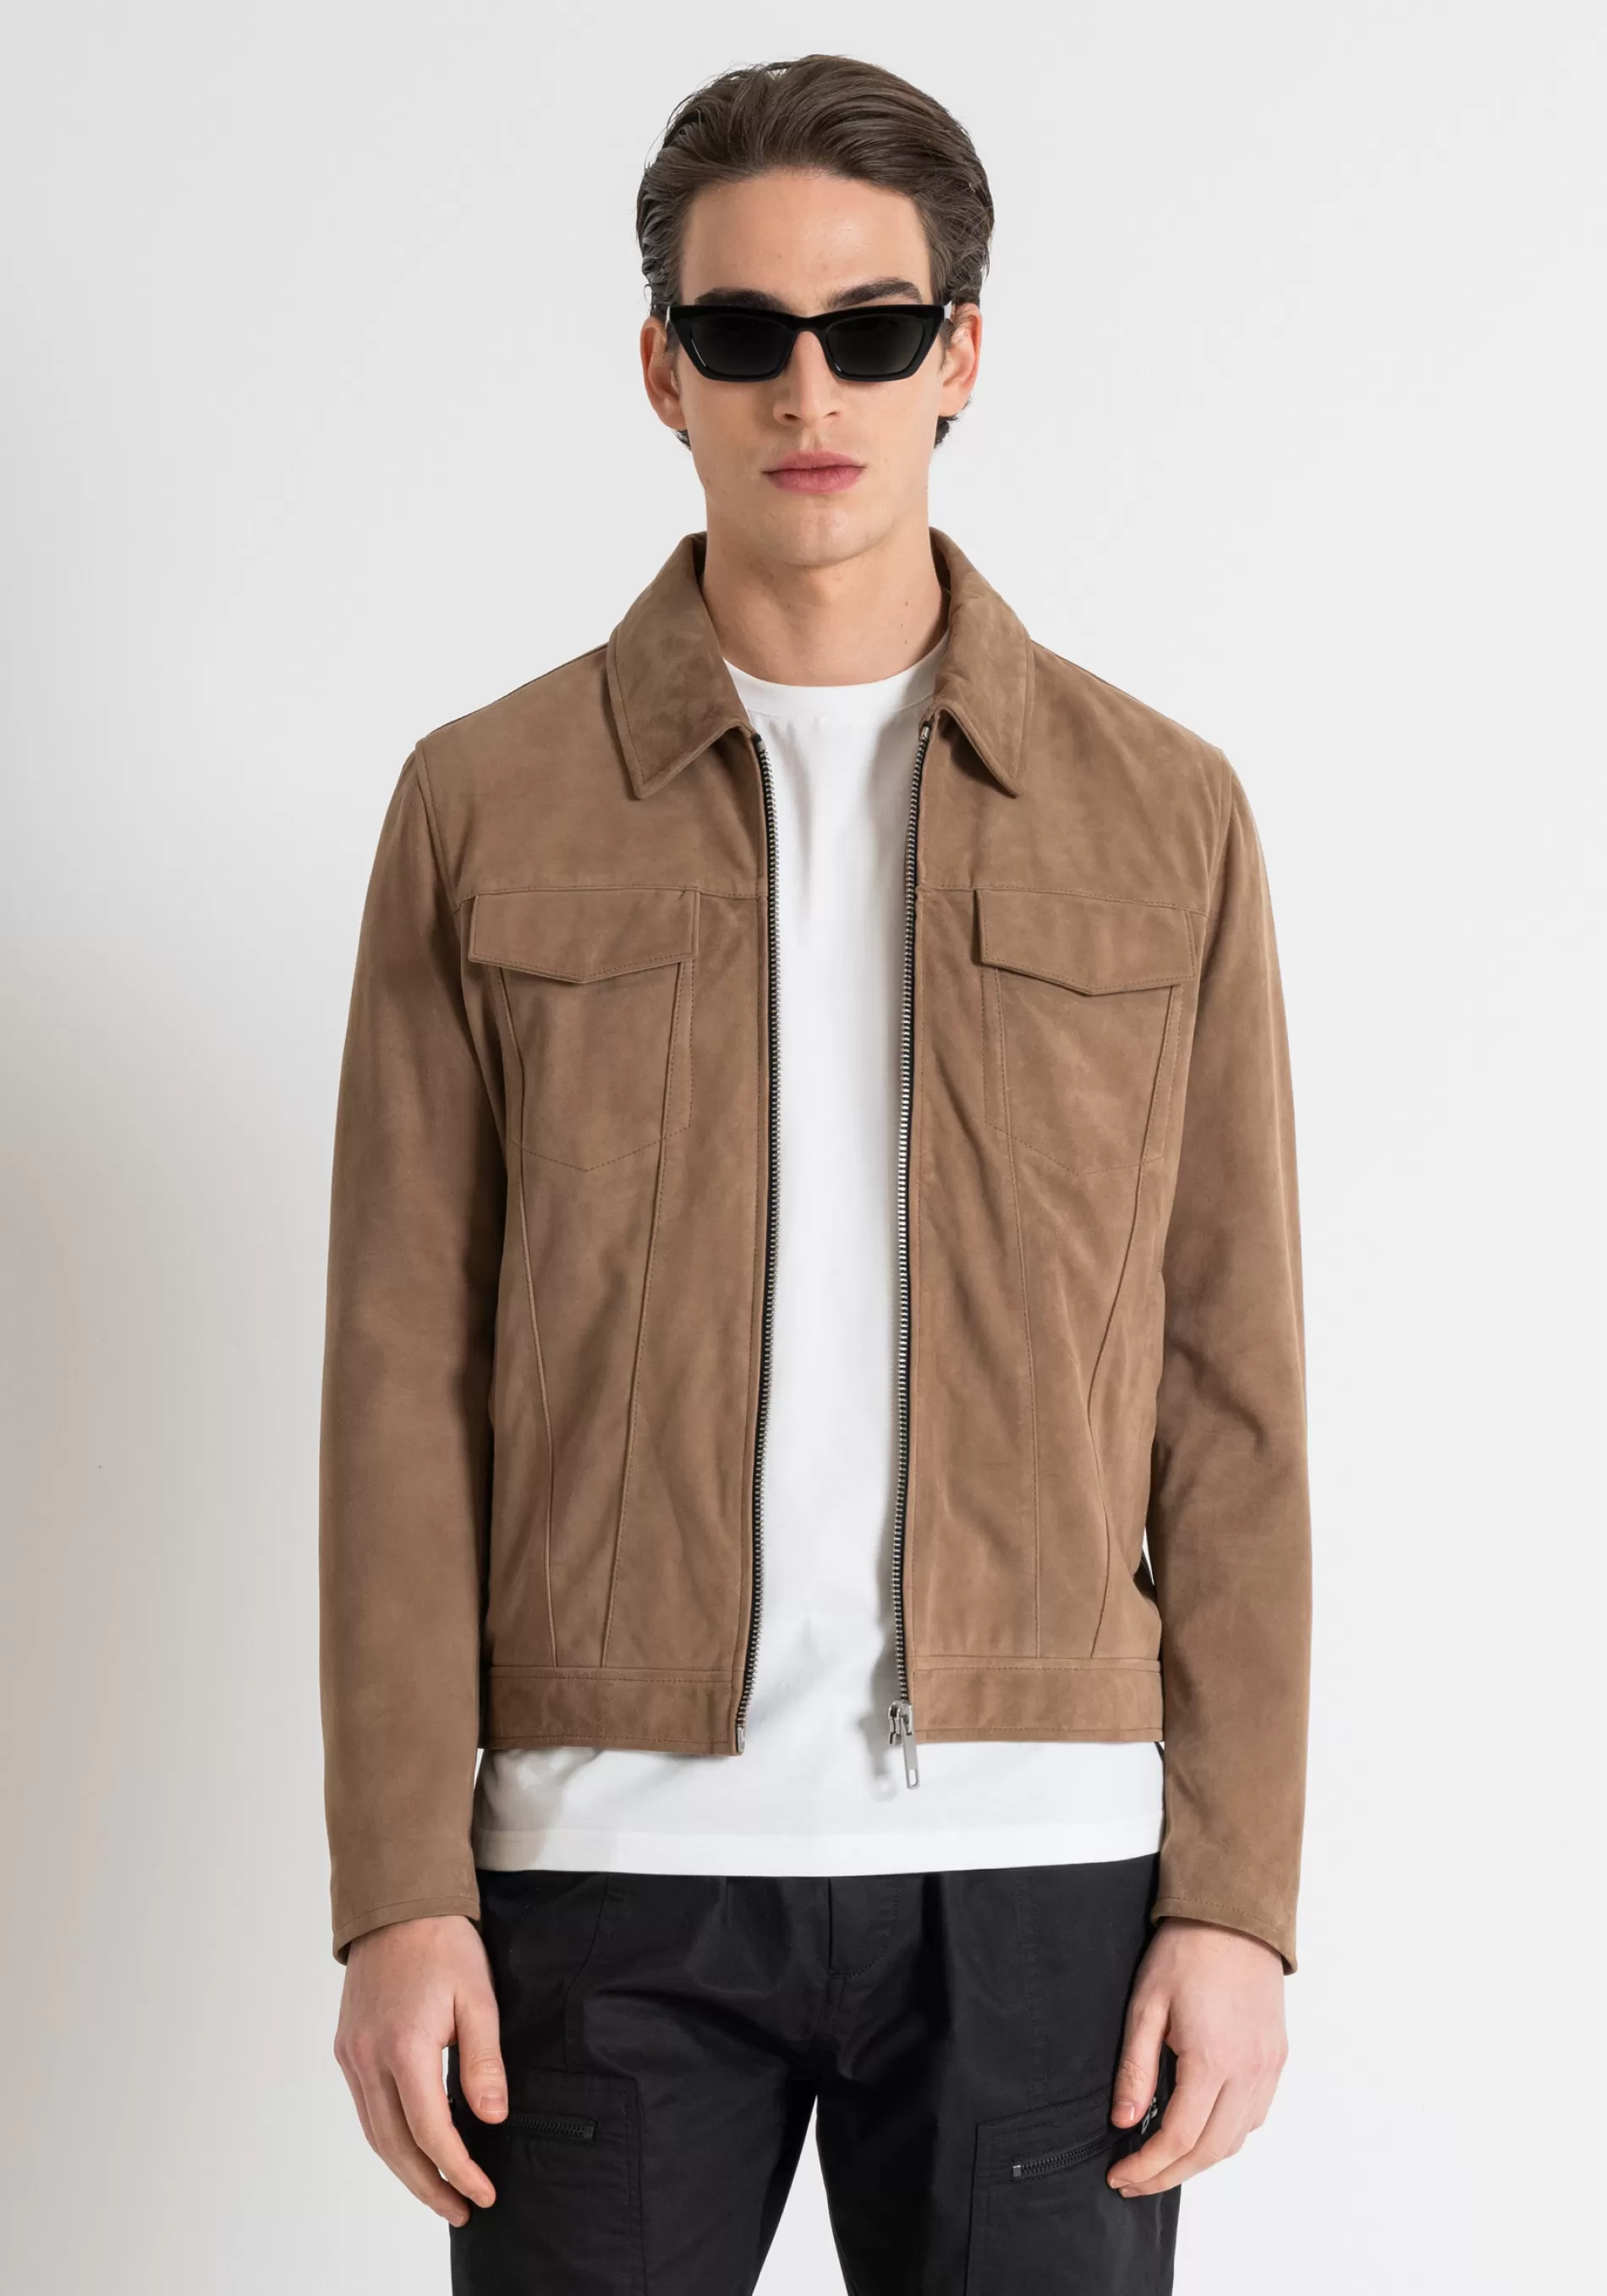 Clearance SLIM FIT SUEDE LEATHER JACKET Field Jackets and Coats | Leather Coats